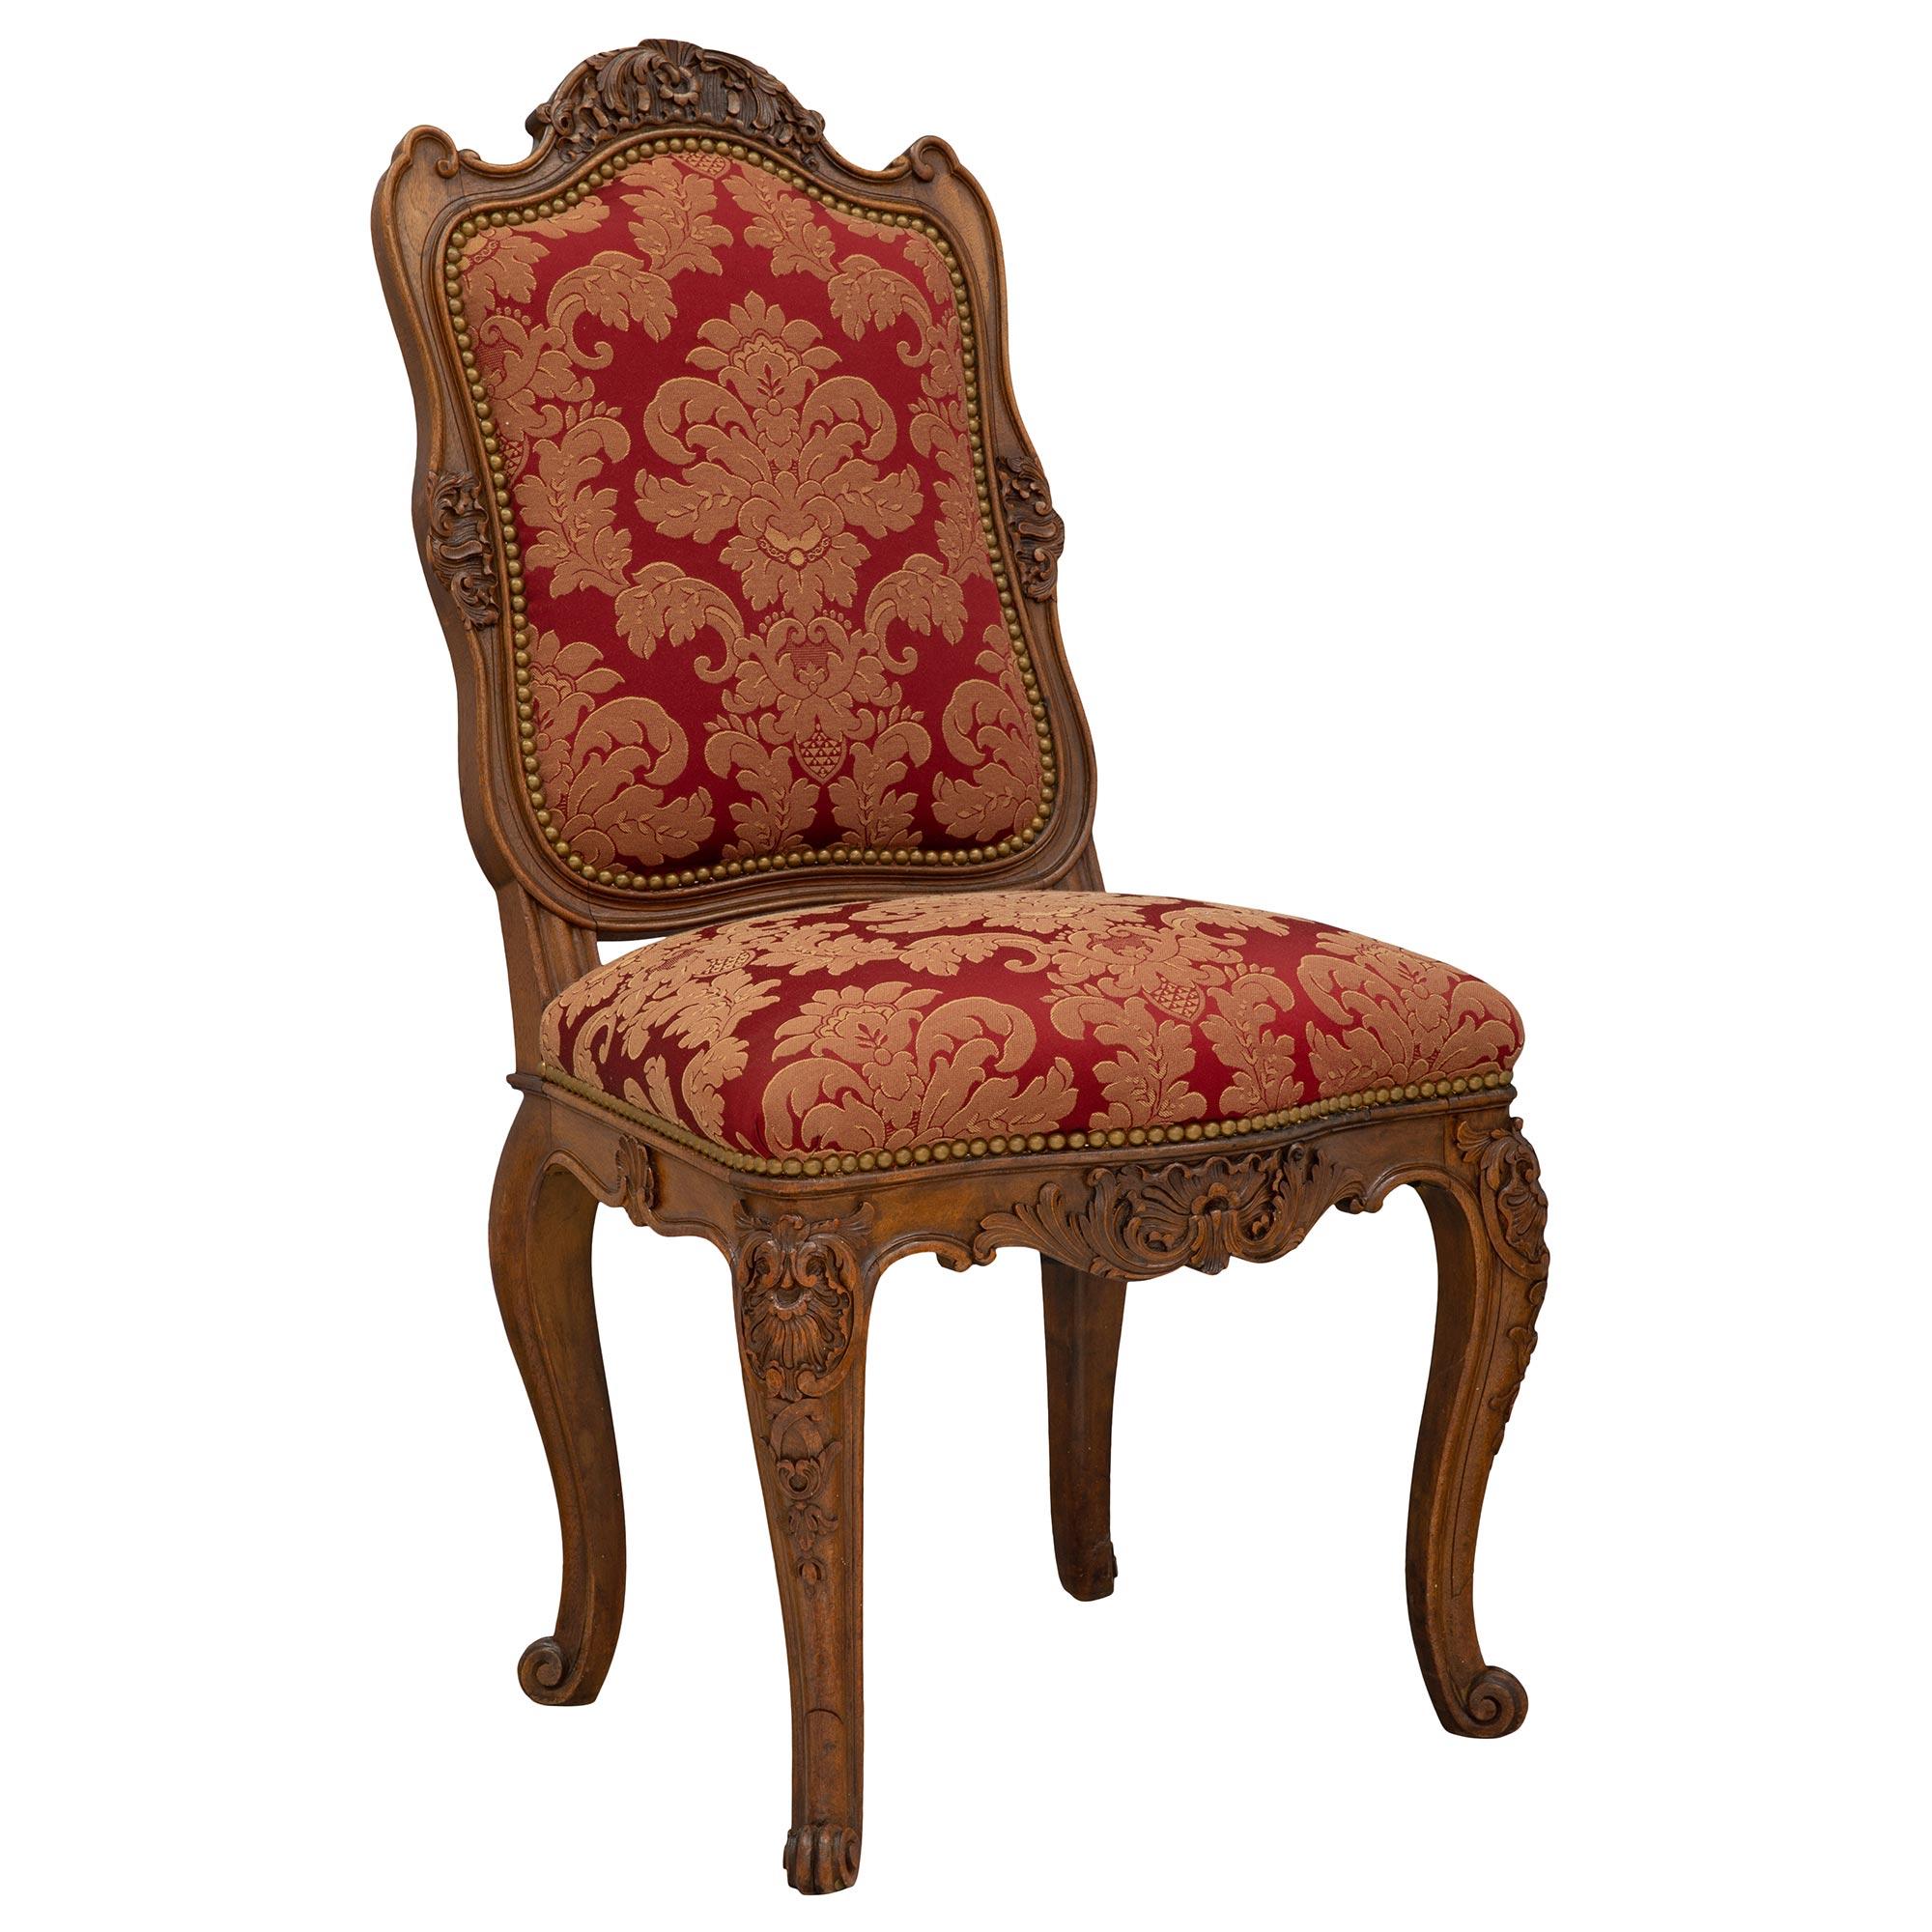 A fine pair of French 19th century Louis XV st. dark oak chairs. Each chair is raised by elegant cabriole legs and handsomely decorated with carvings of shells, acanthus leaves, and scrolls, which continue at the frieze. The back of each chair back